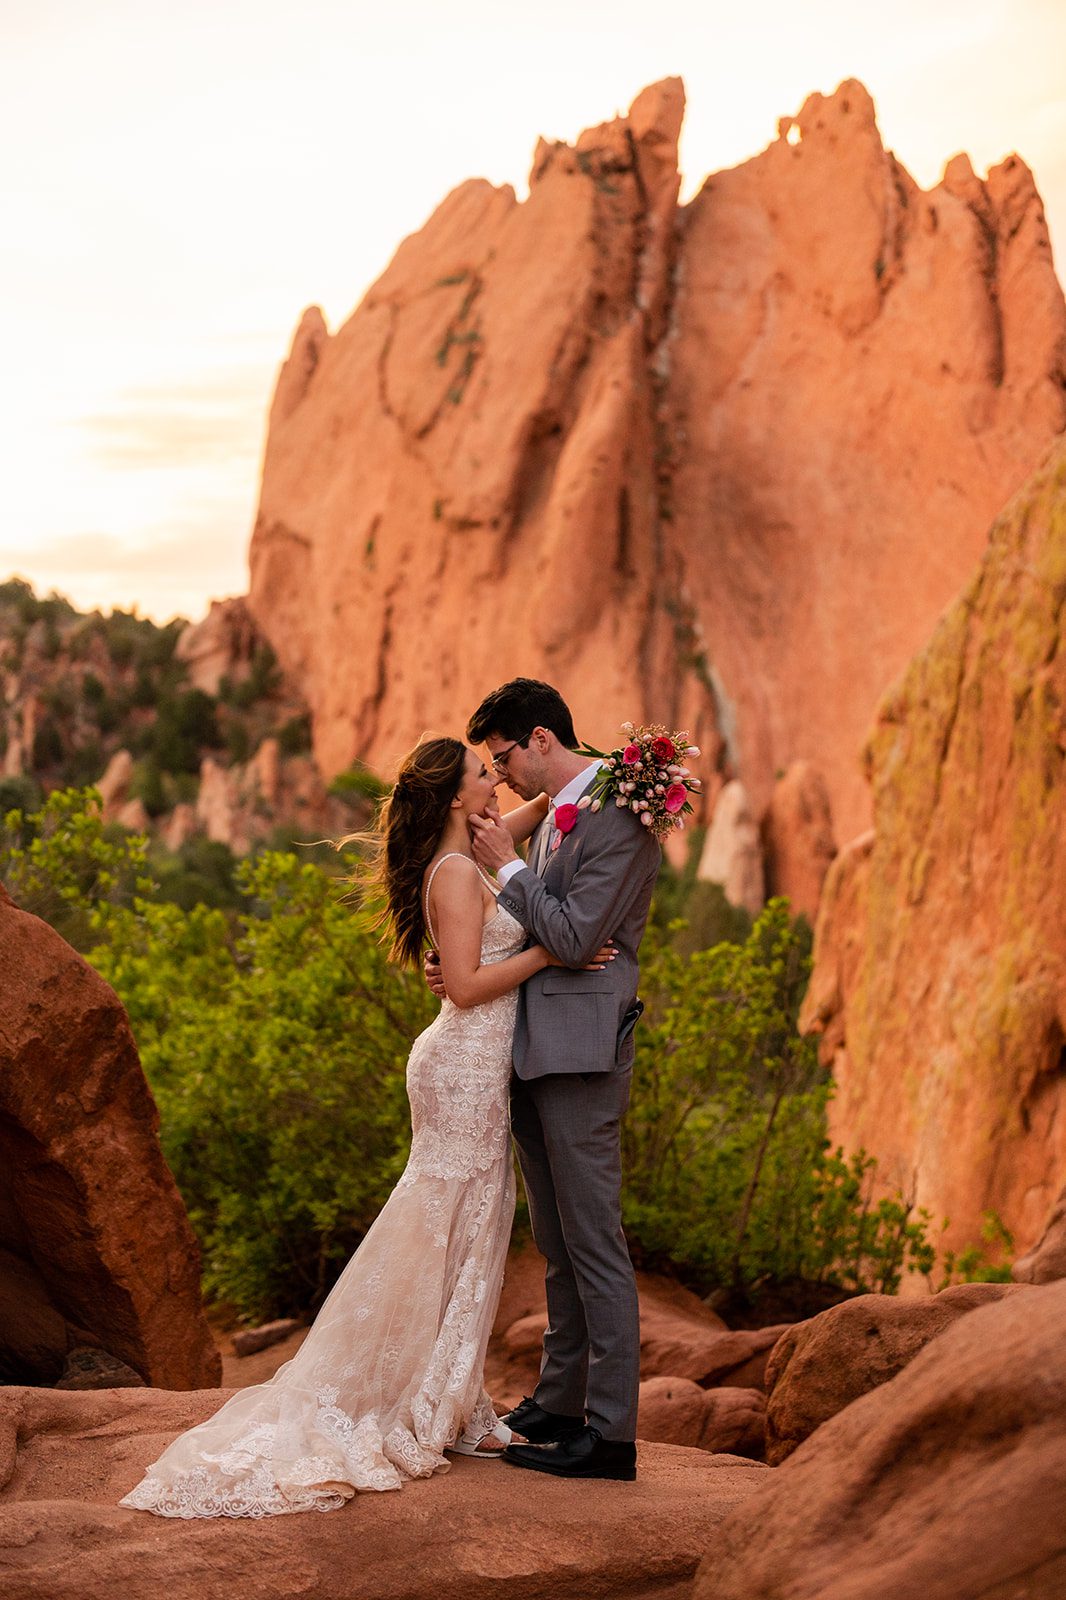 Sunset elopement at Garden of the Gods in Colorado Springs